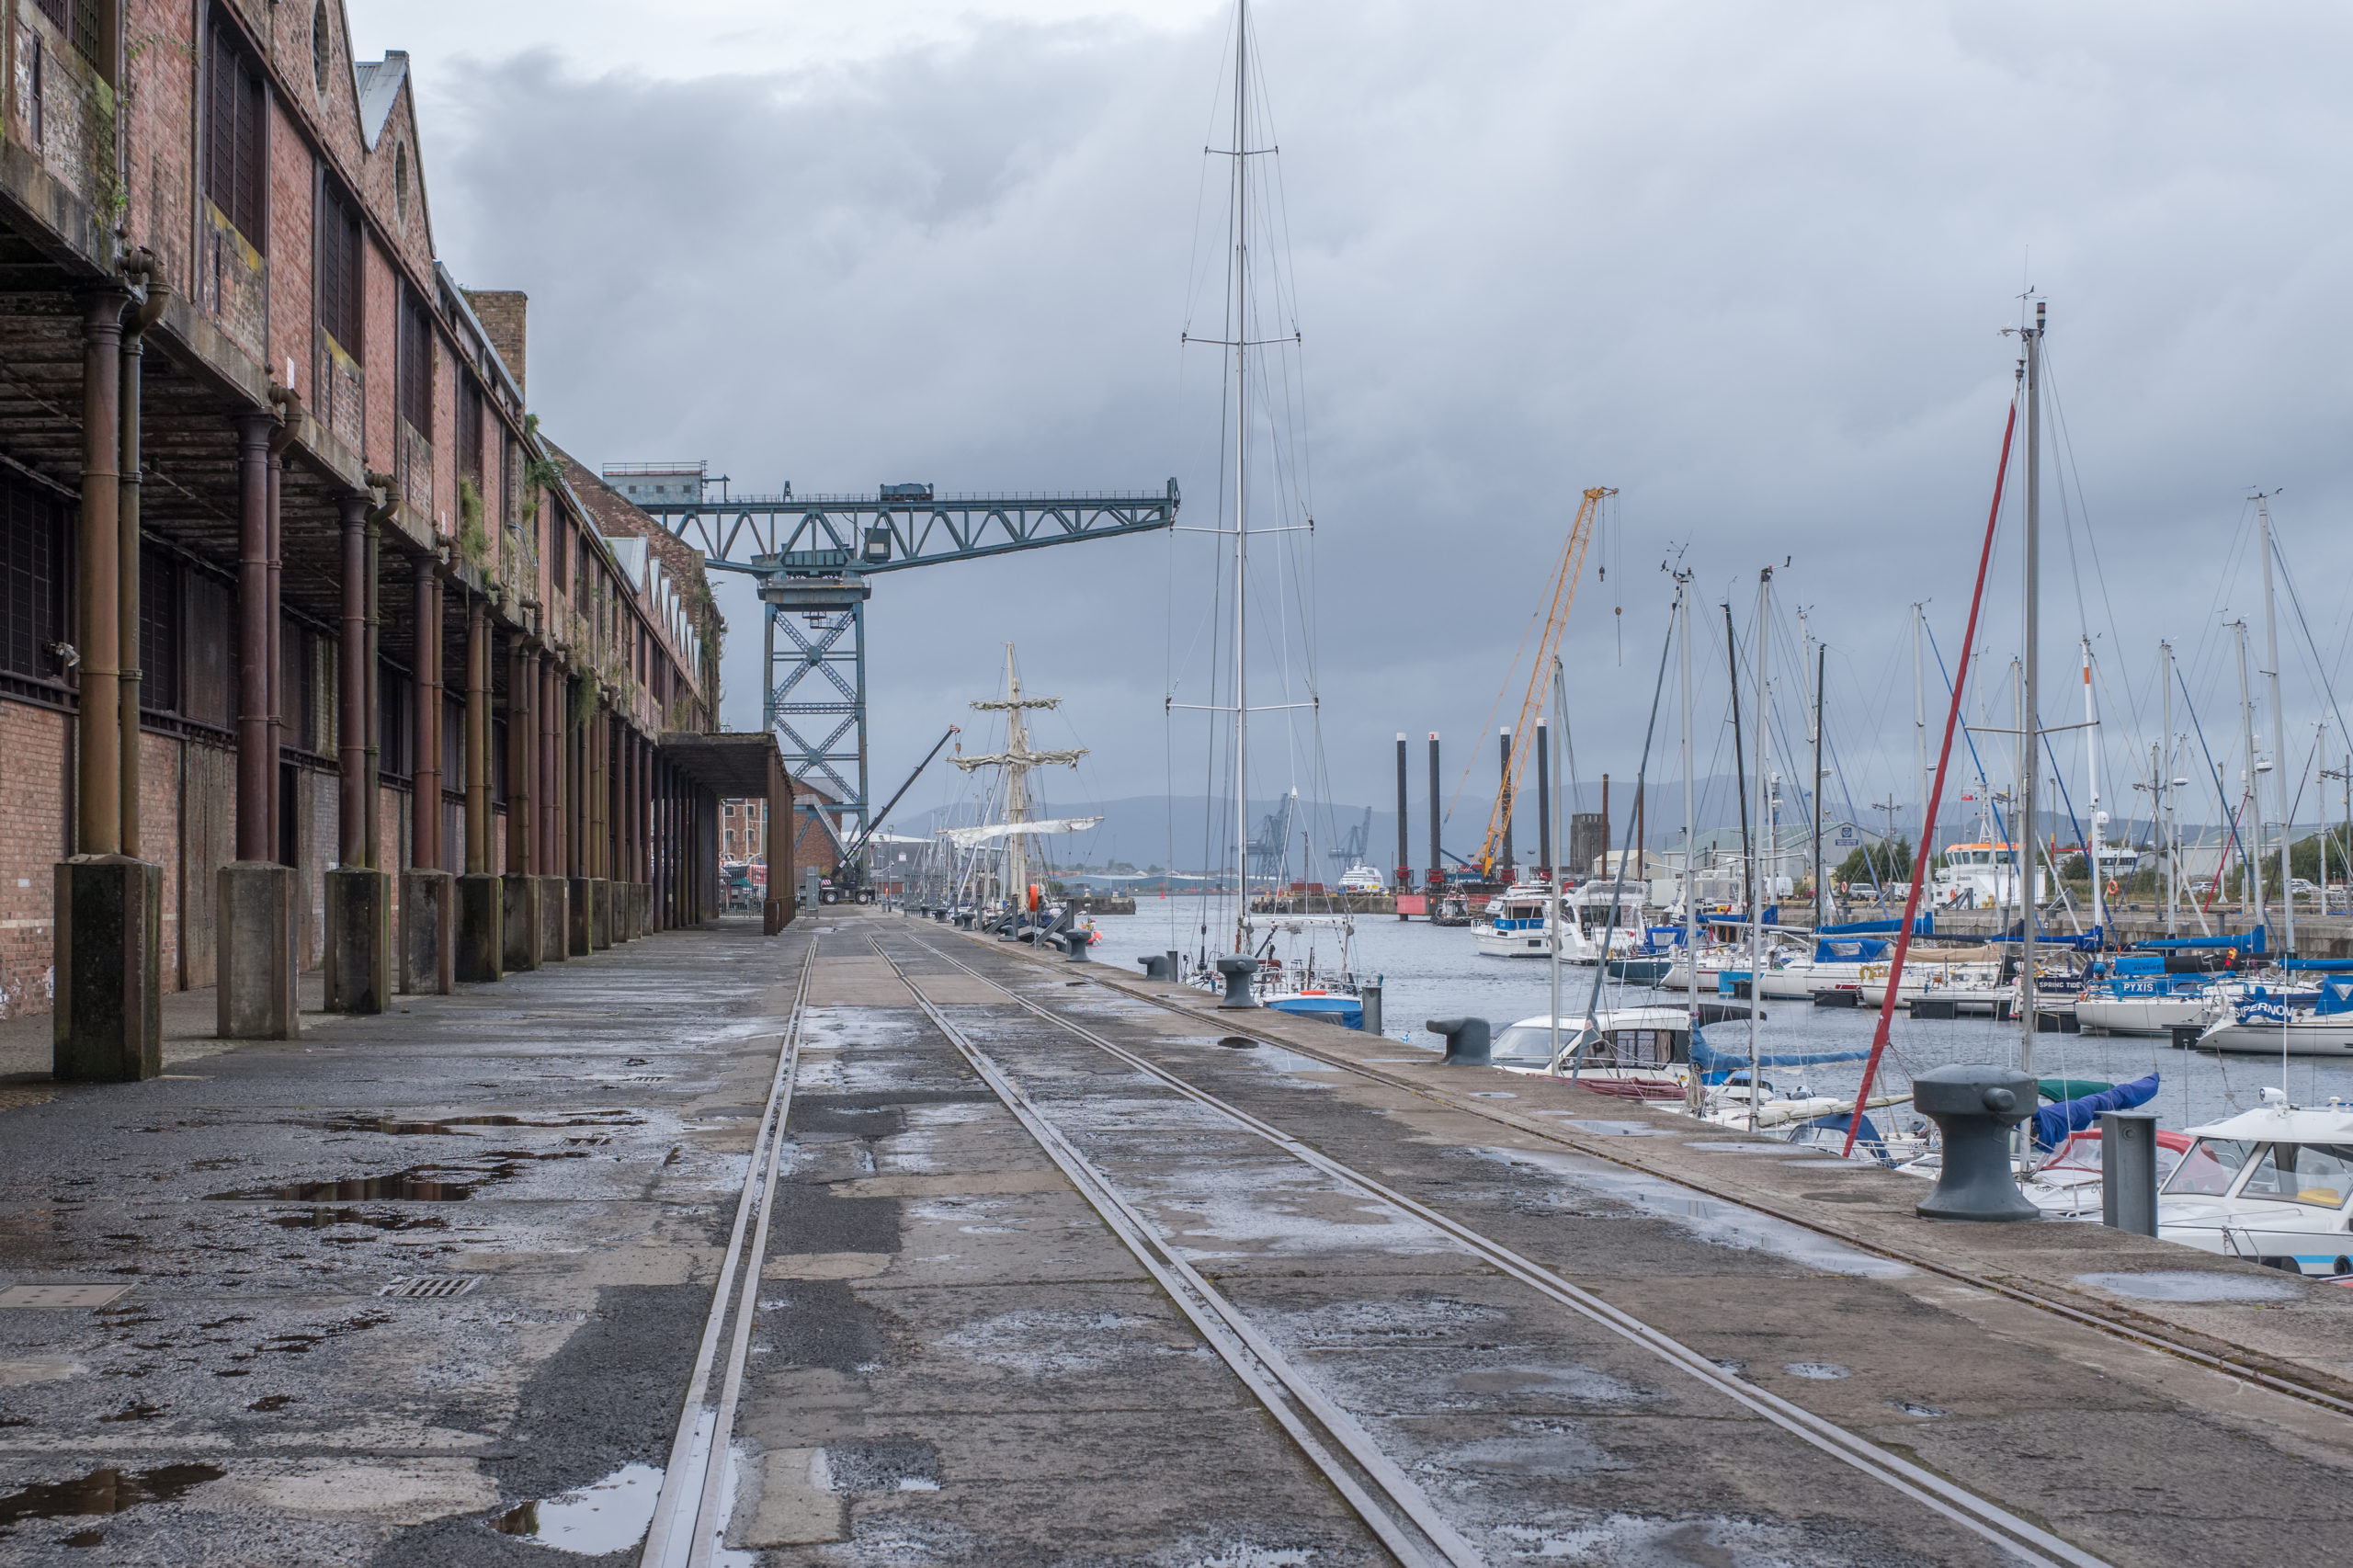 The Sugar Sheds in Greenock are a possible location for a museum